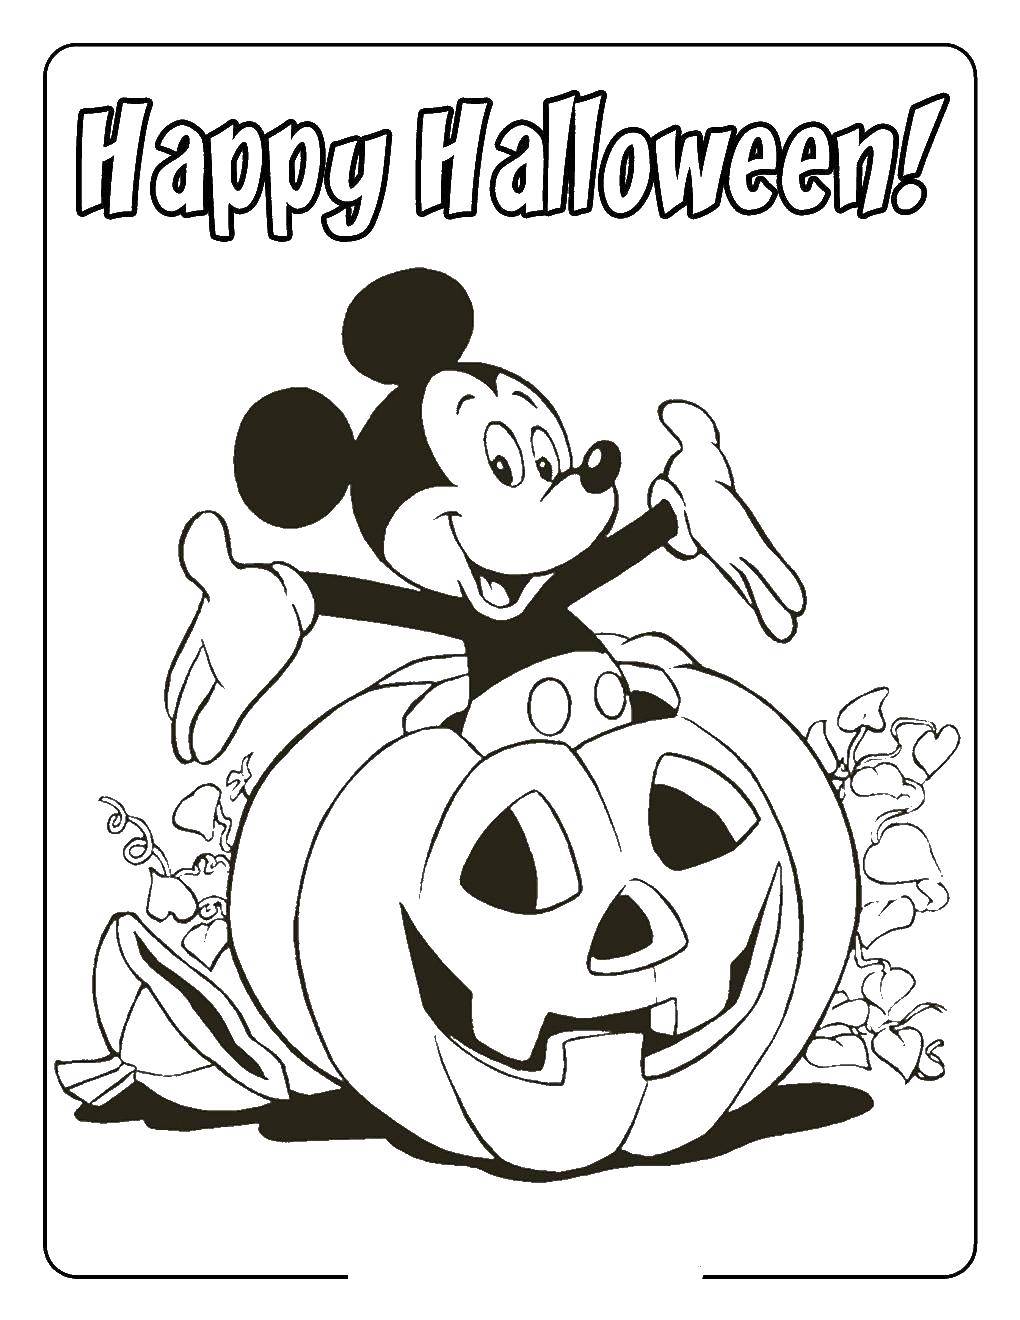 Coloring Happy Halloween. Category Halloween. Tags:  Halloween, pumpkin, Mickey mouse.